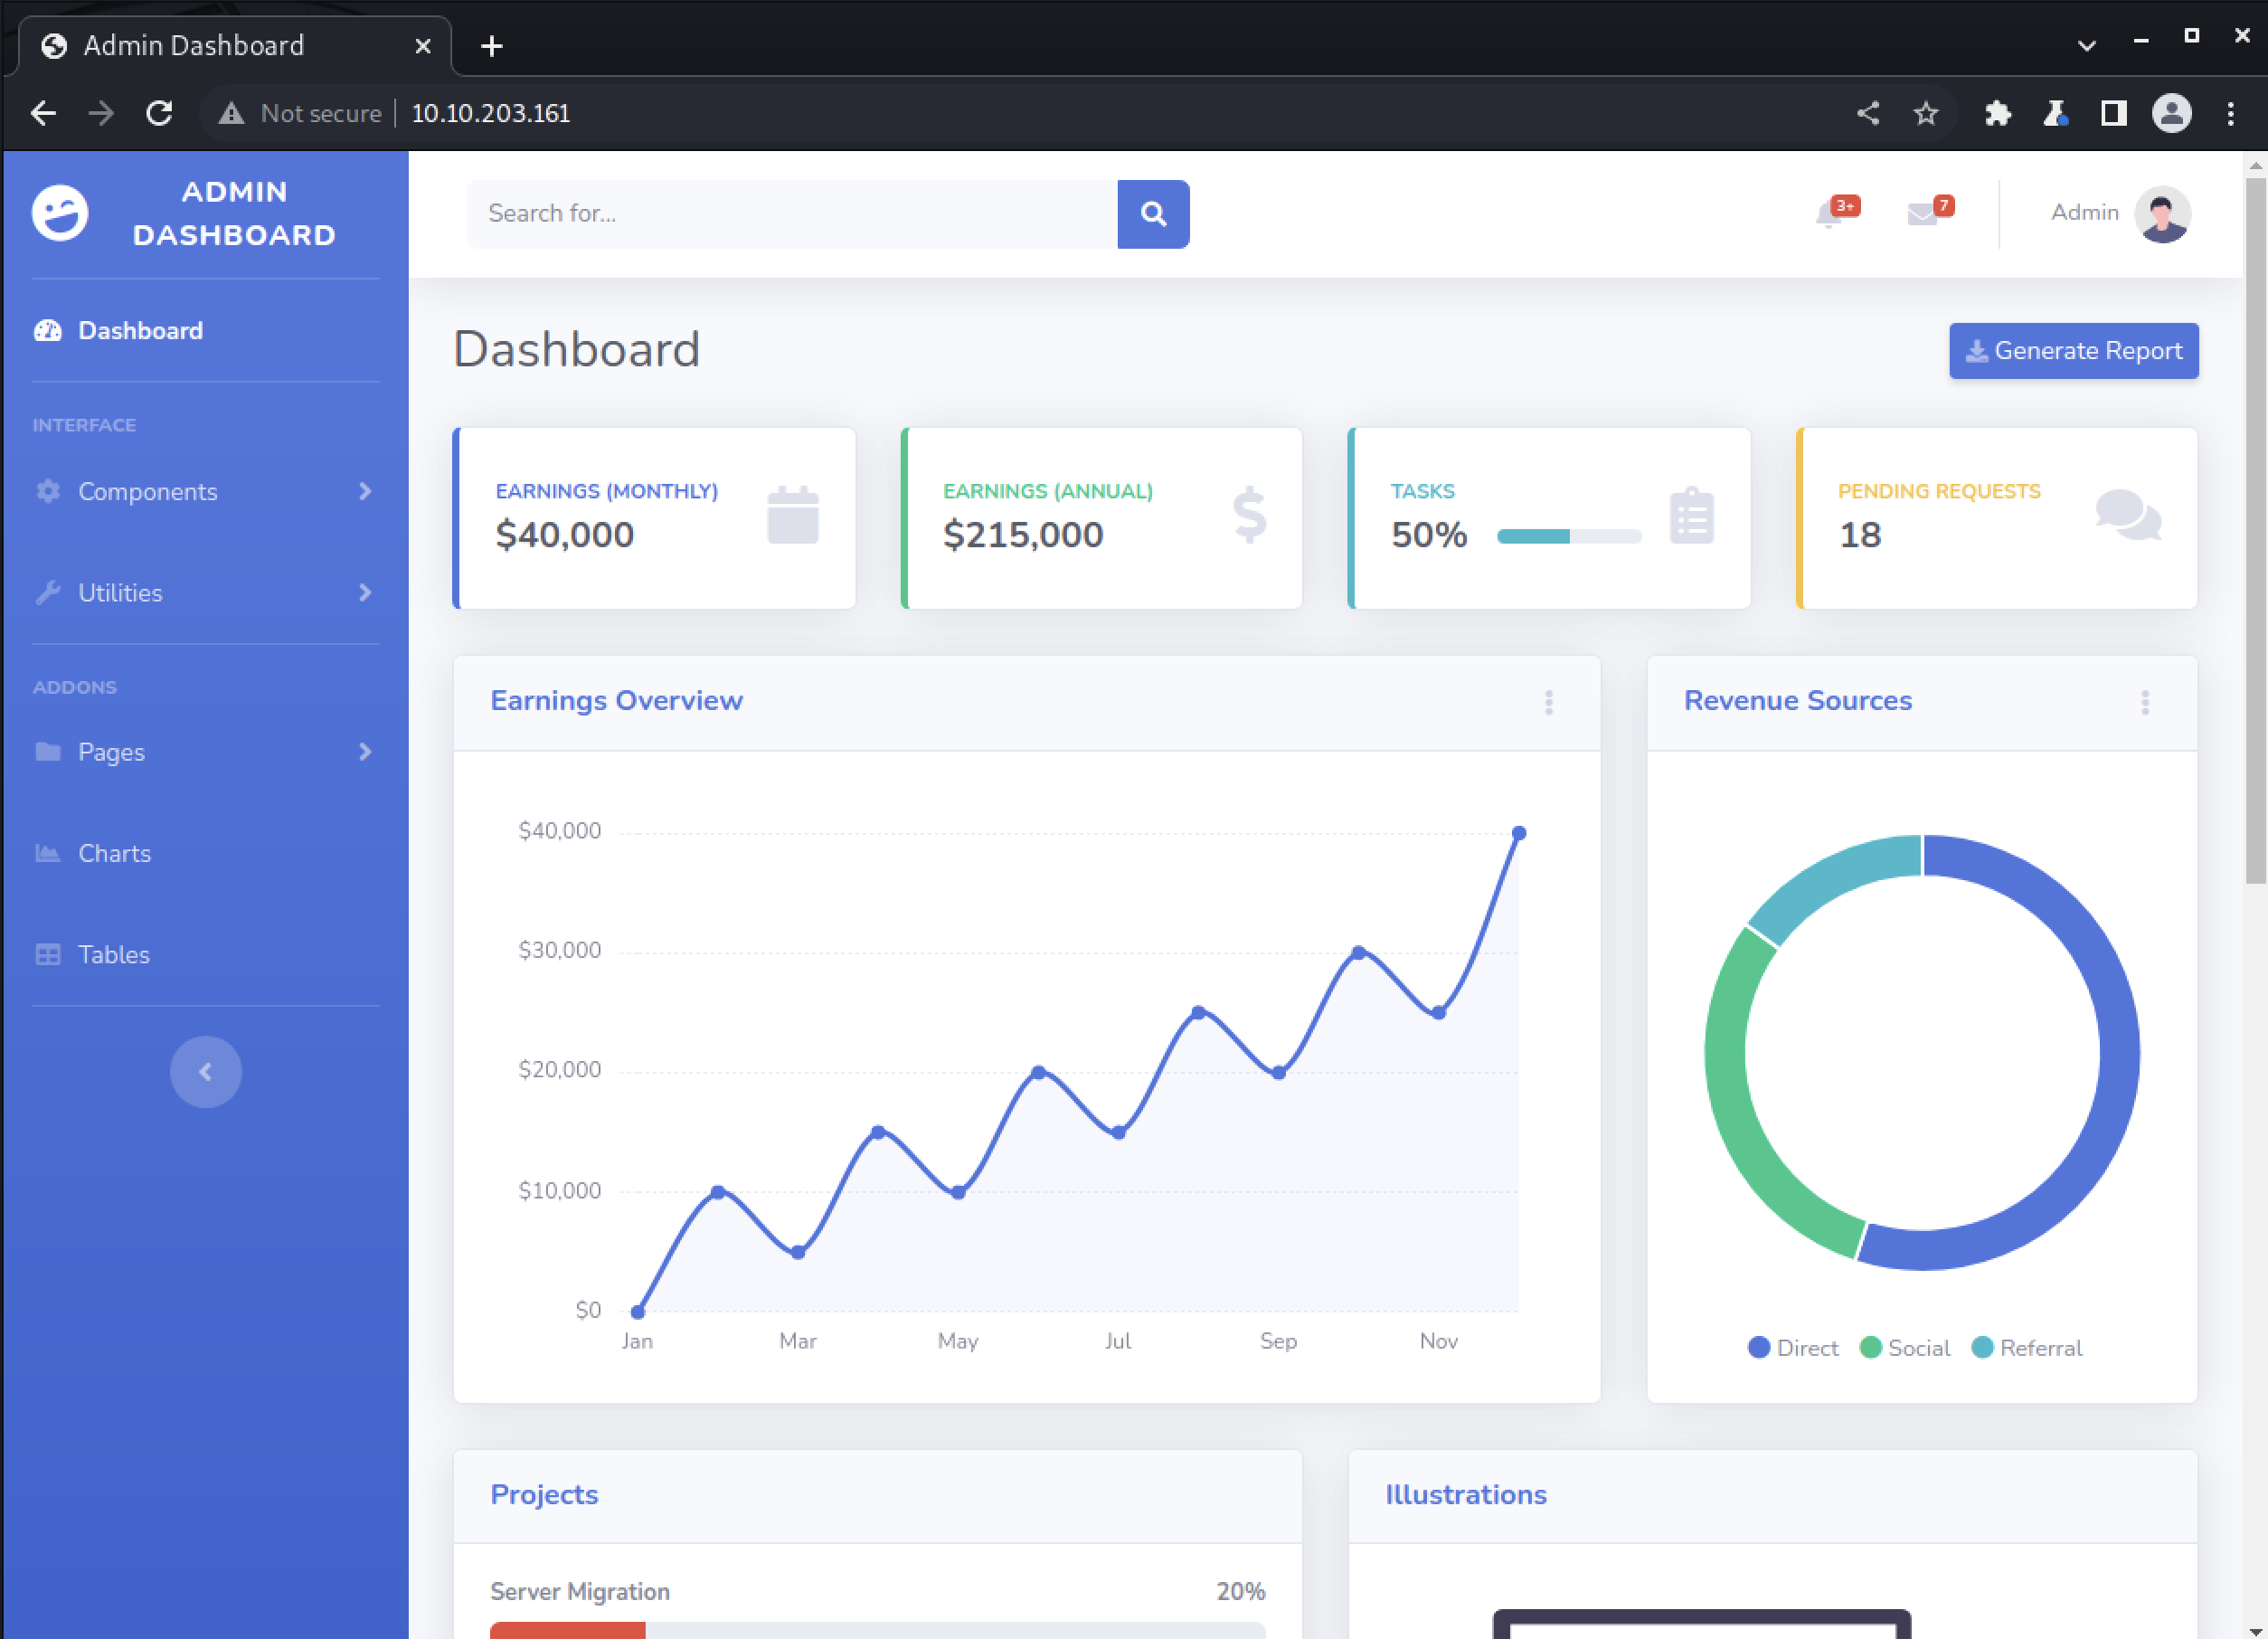 Admin Dashboard page on port 80